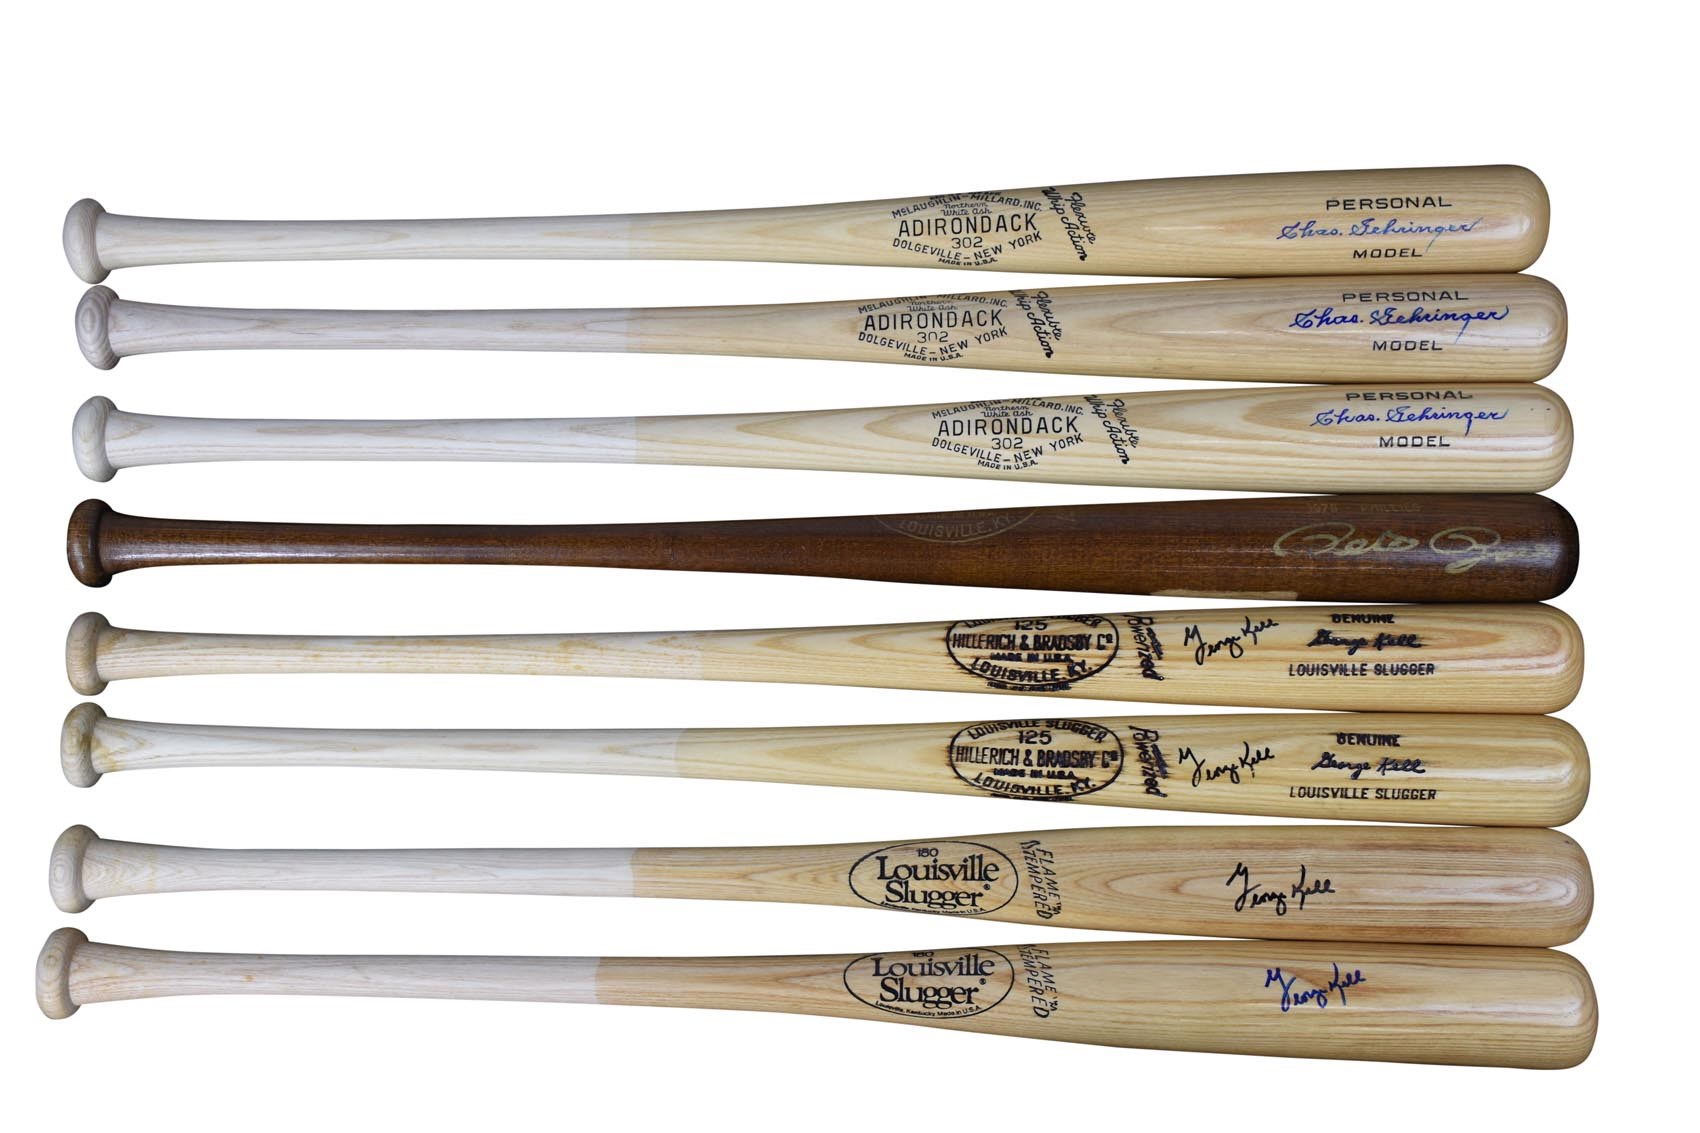 Baseball Memorabilia - Signed & Unsigned Bats including Cooperstown Collection (80+)